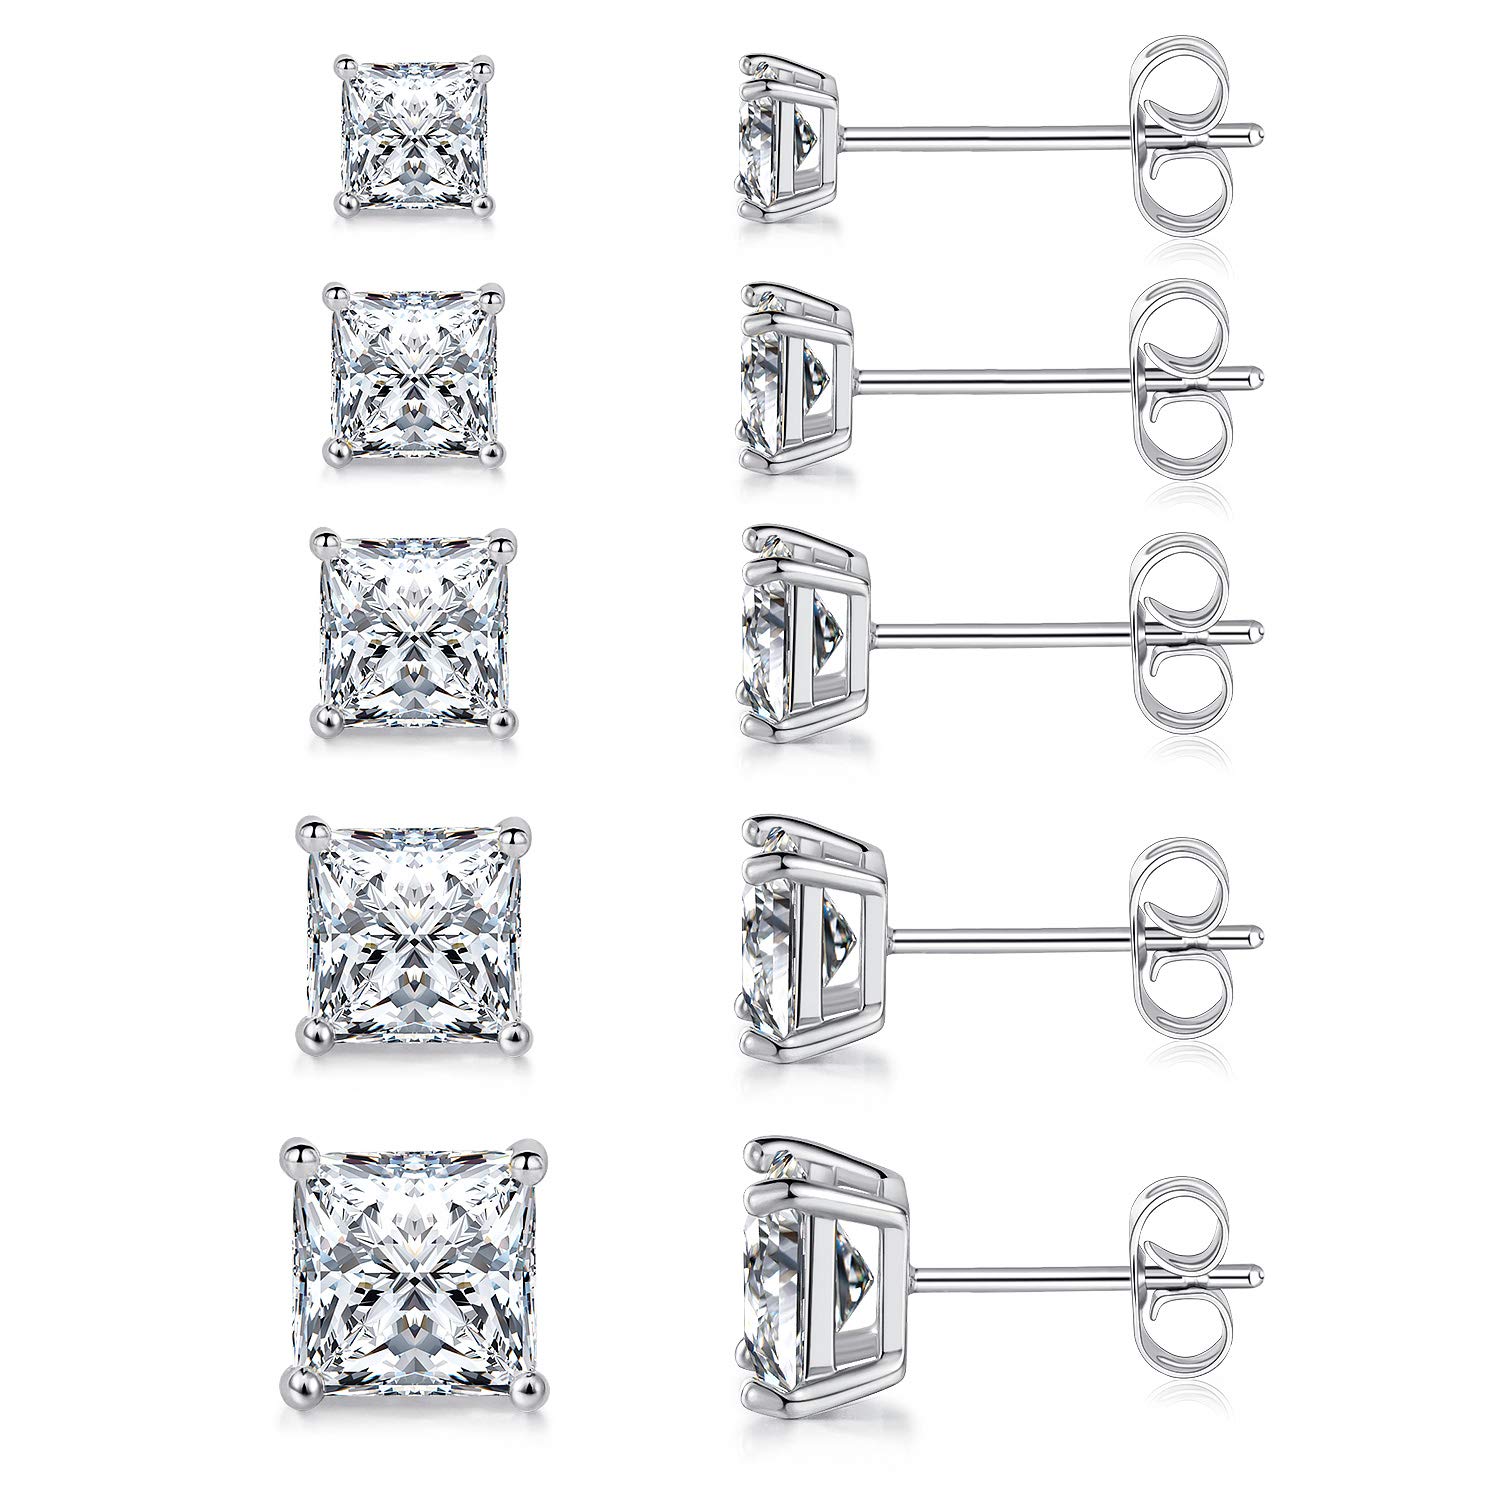 MDFUN 18K White Gold Plated Princess Cut Clear Cubic Zirconia Stud Earring Pack of 5 Pairs